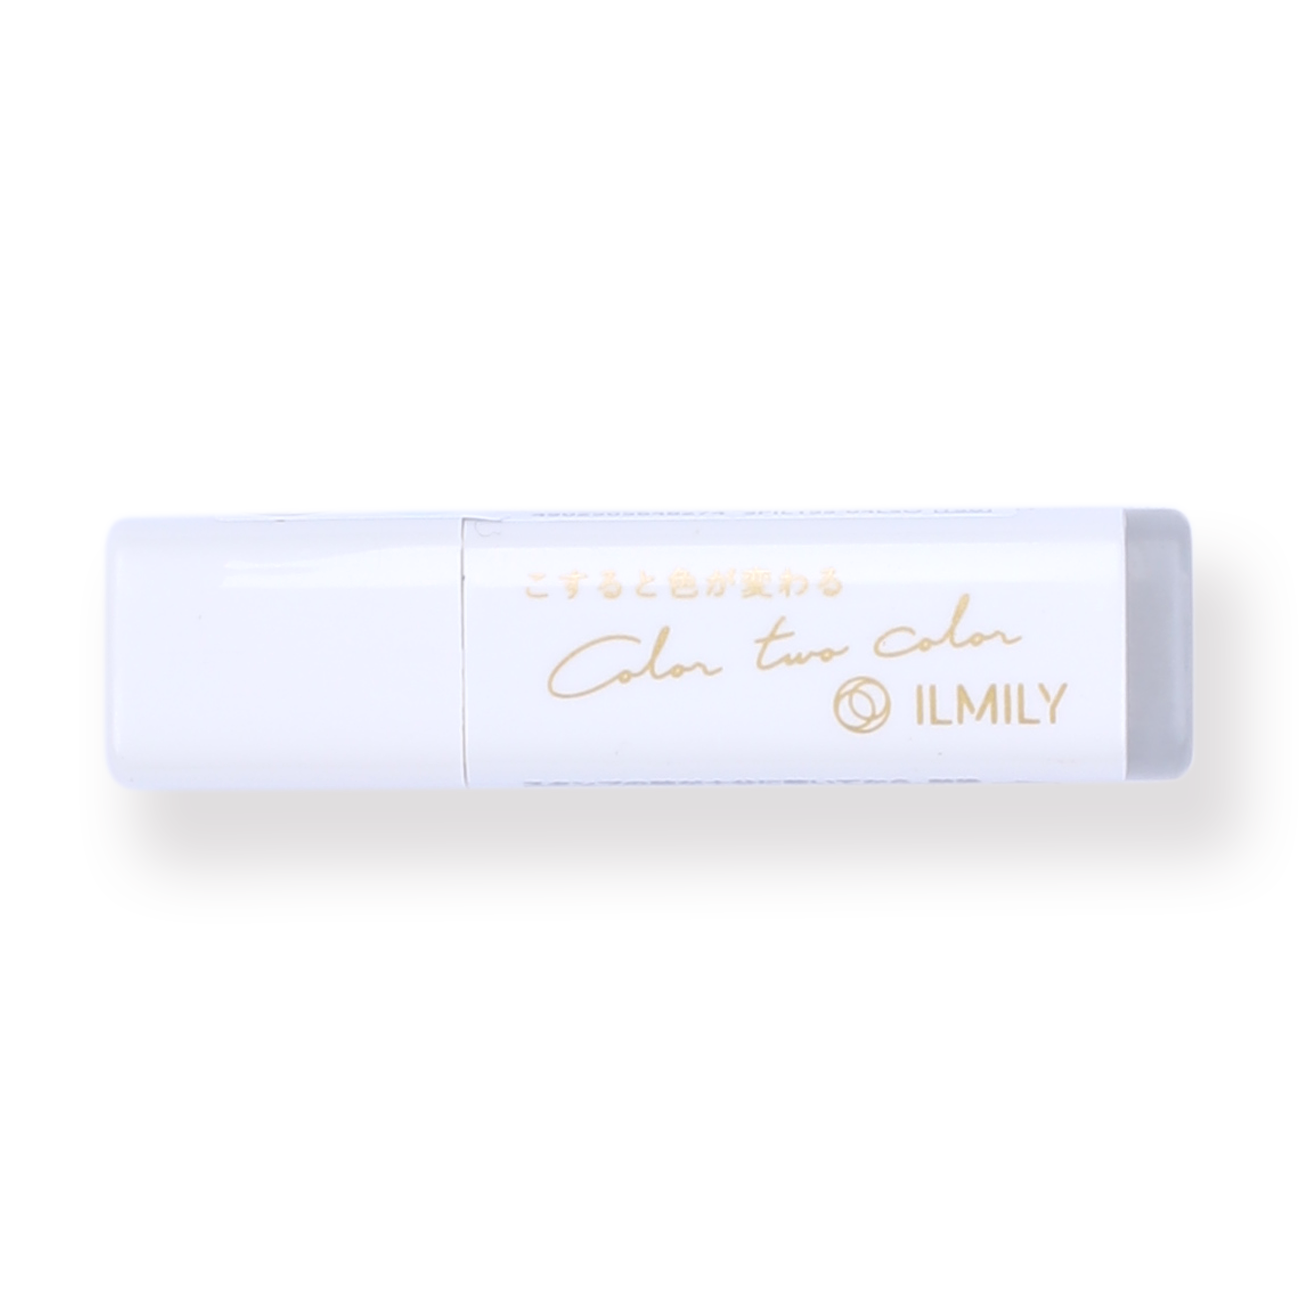 Pilot ILMILY Limited Edition Erasable Stamp - Earth - Stationery Pal